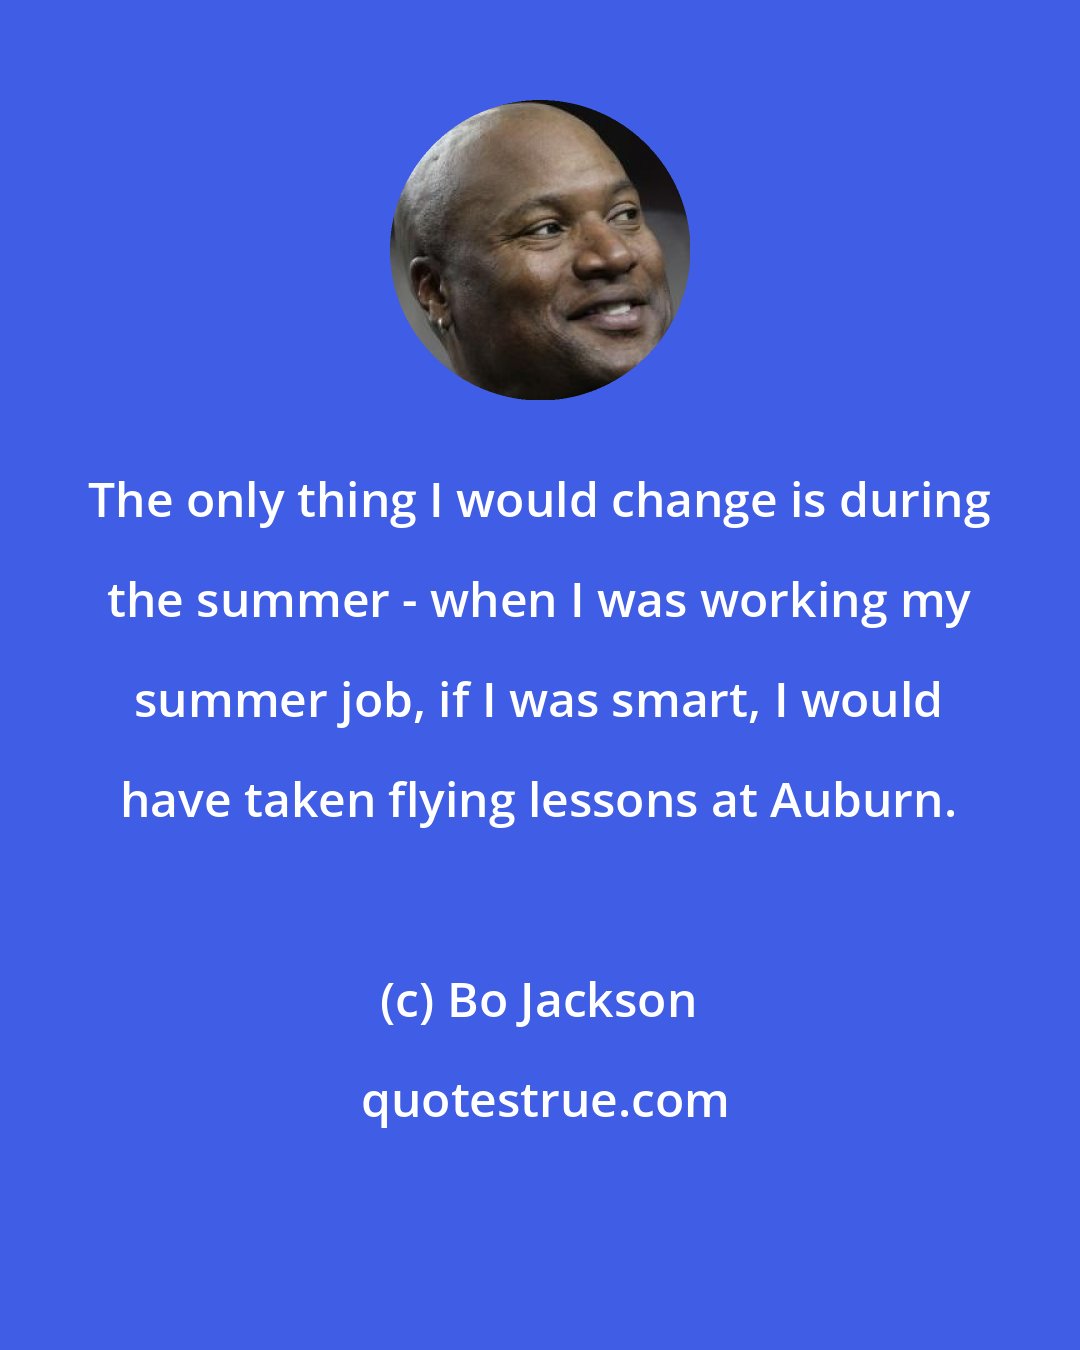 Bo Jackson: The only thing I would change is during the summer - when I was working my summer job, if I was smart, I would have taken flying lessons at Auburn.